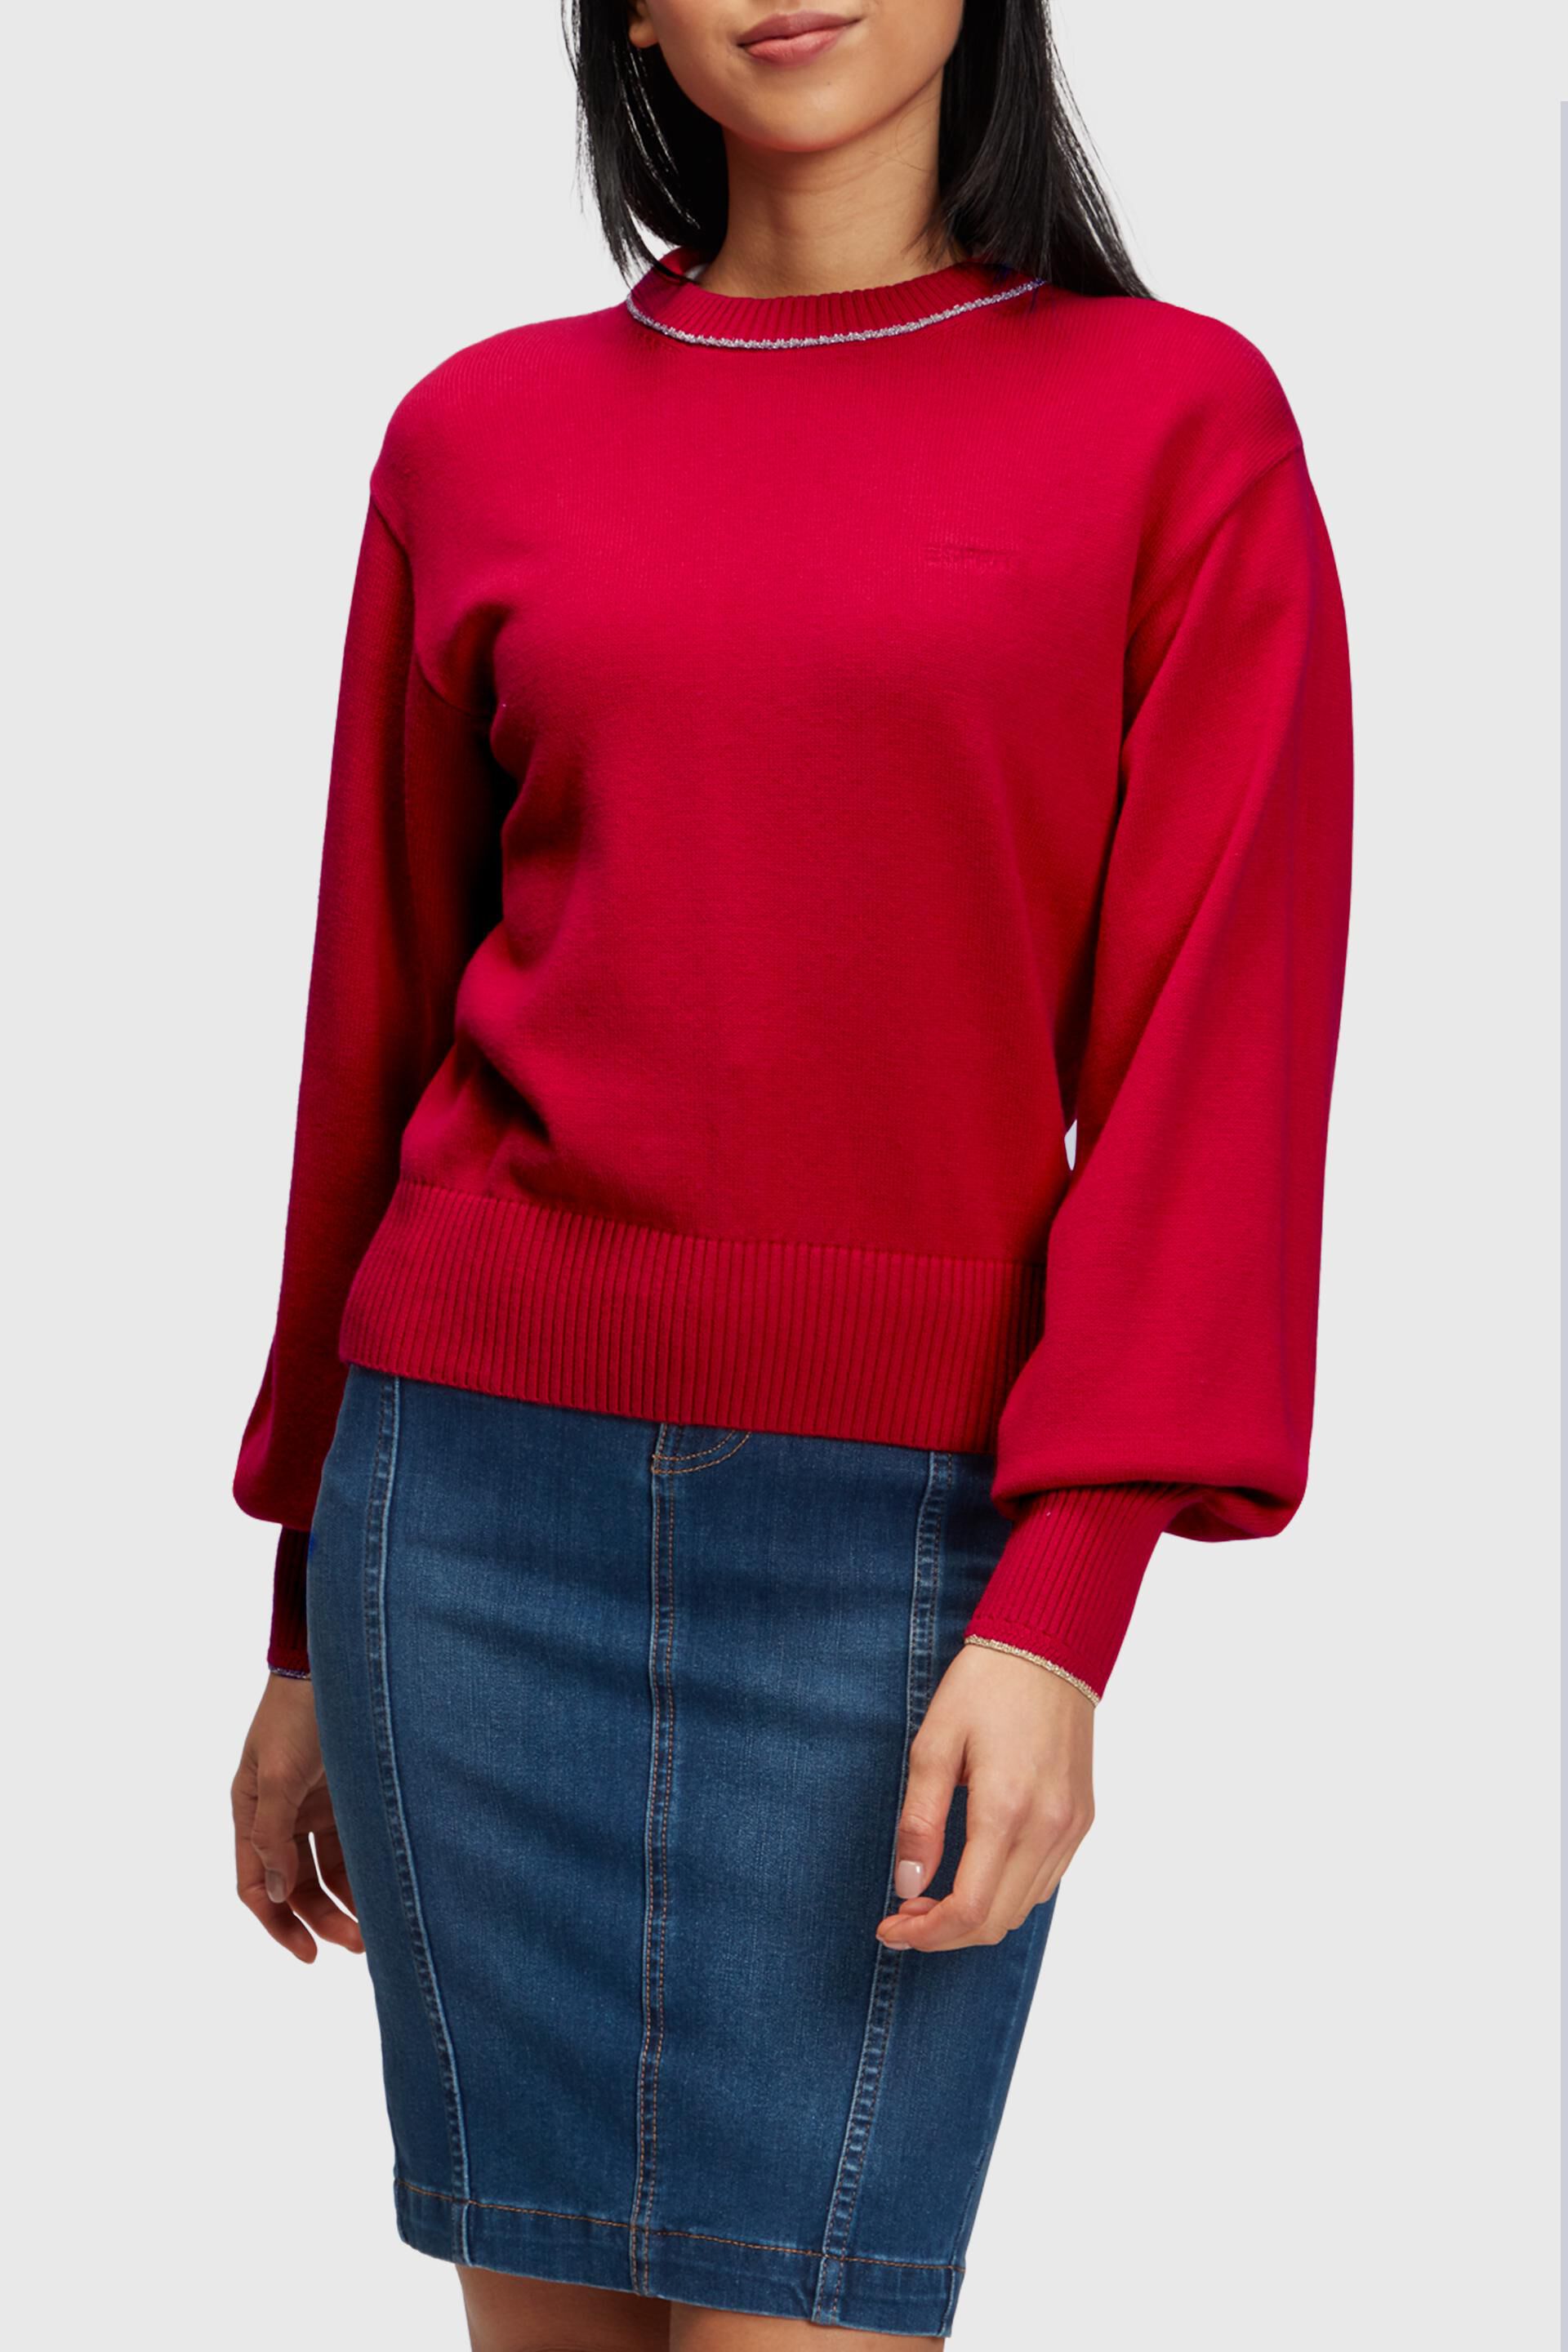 Esprit jumper Puffed with sleeved cashmere